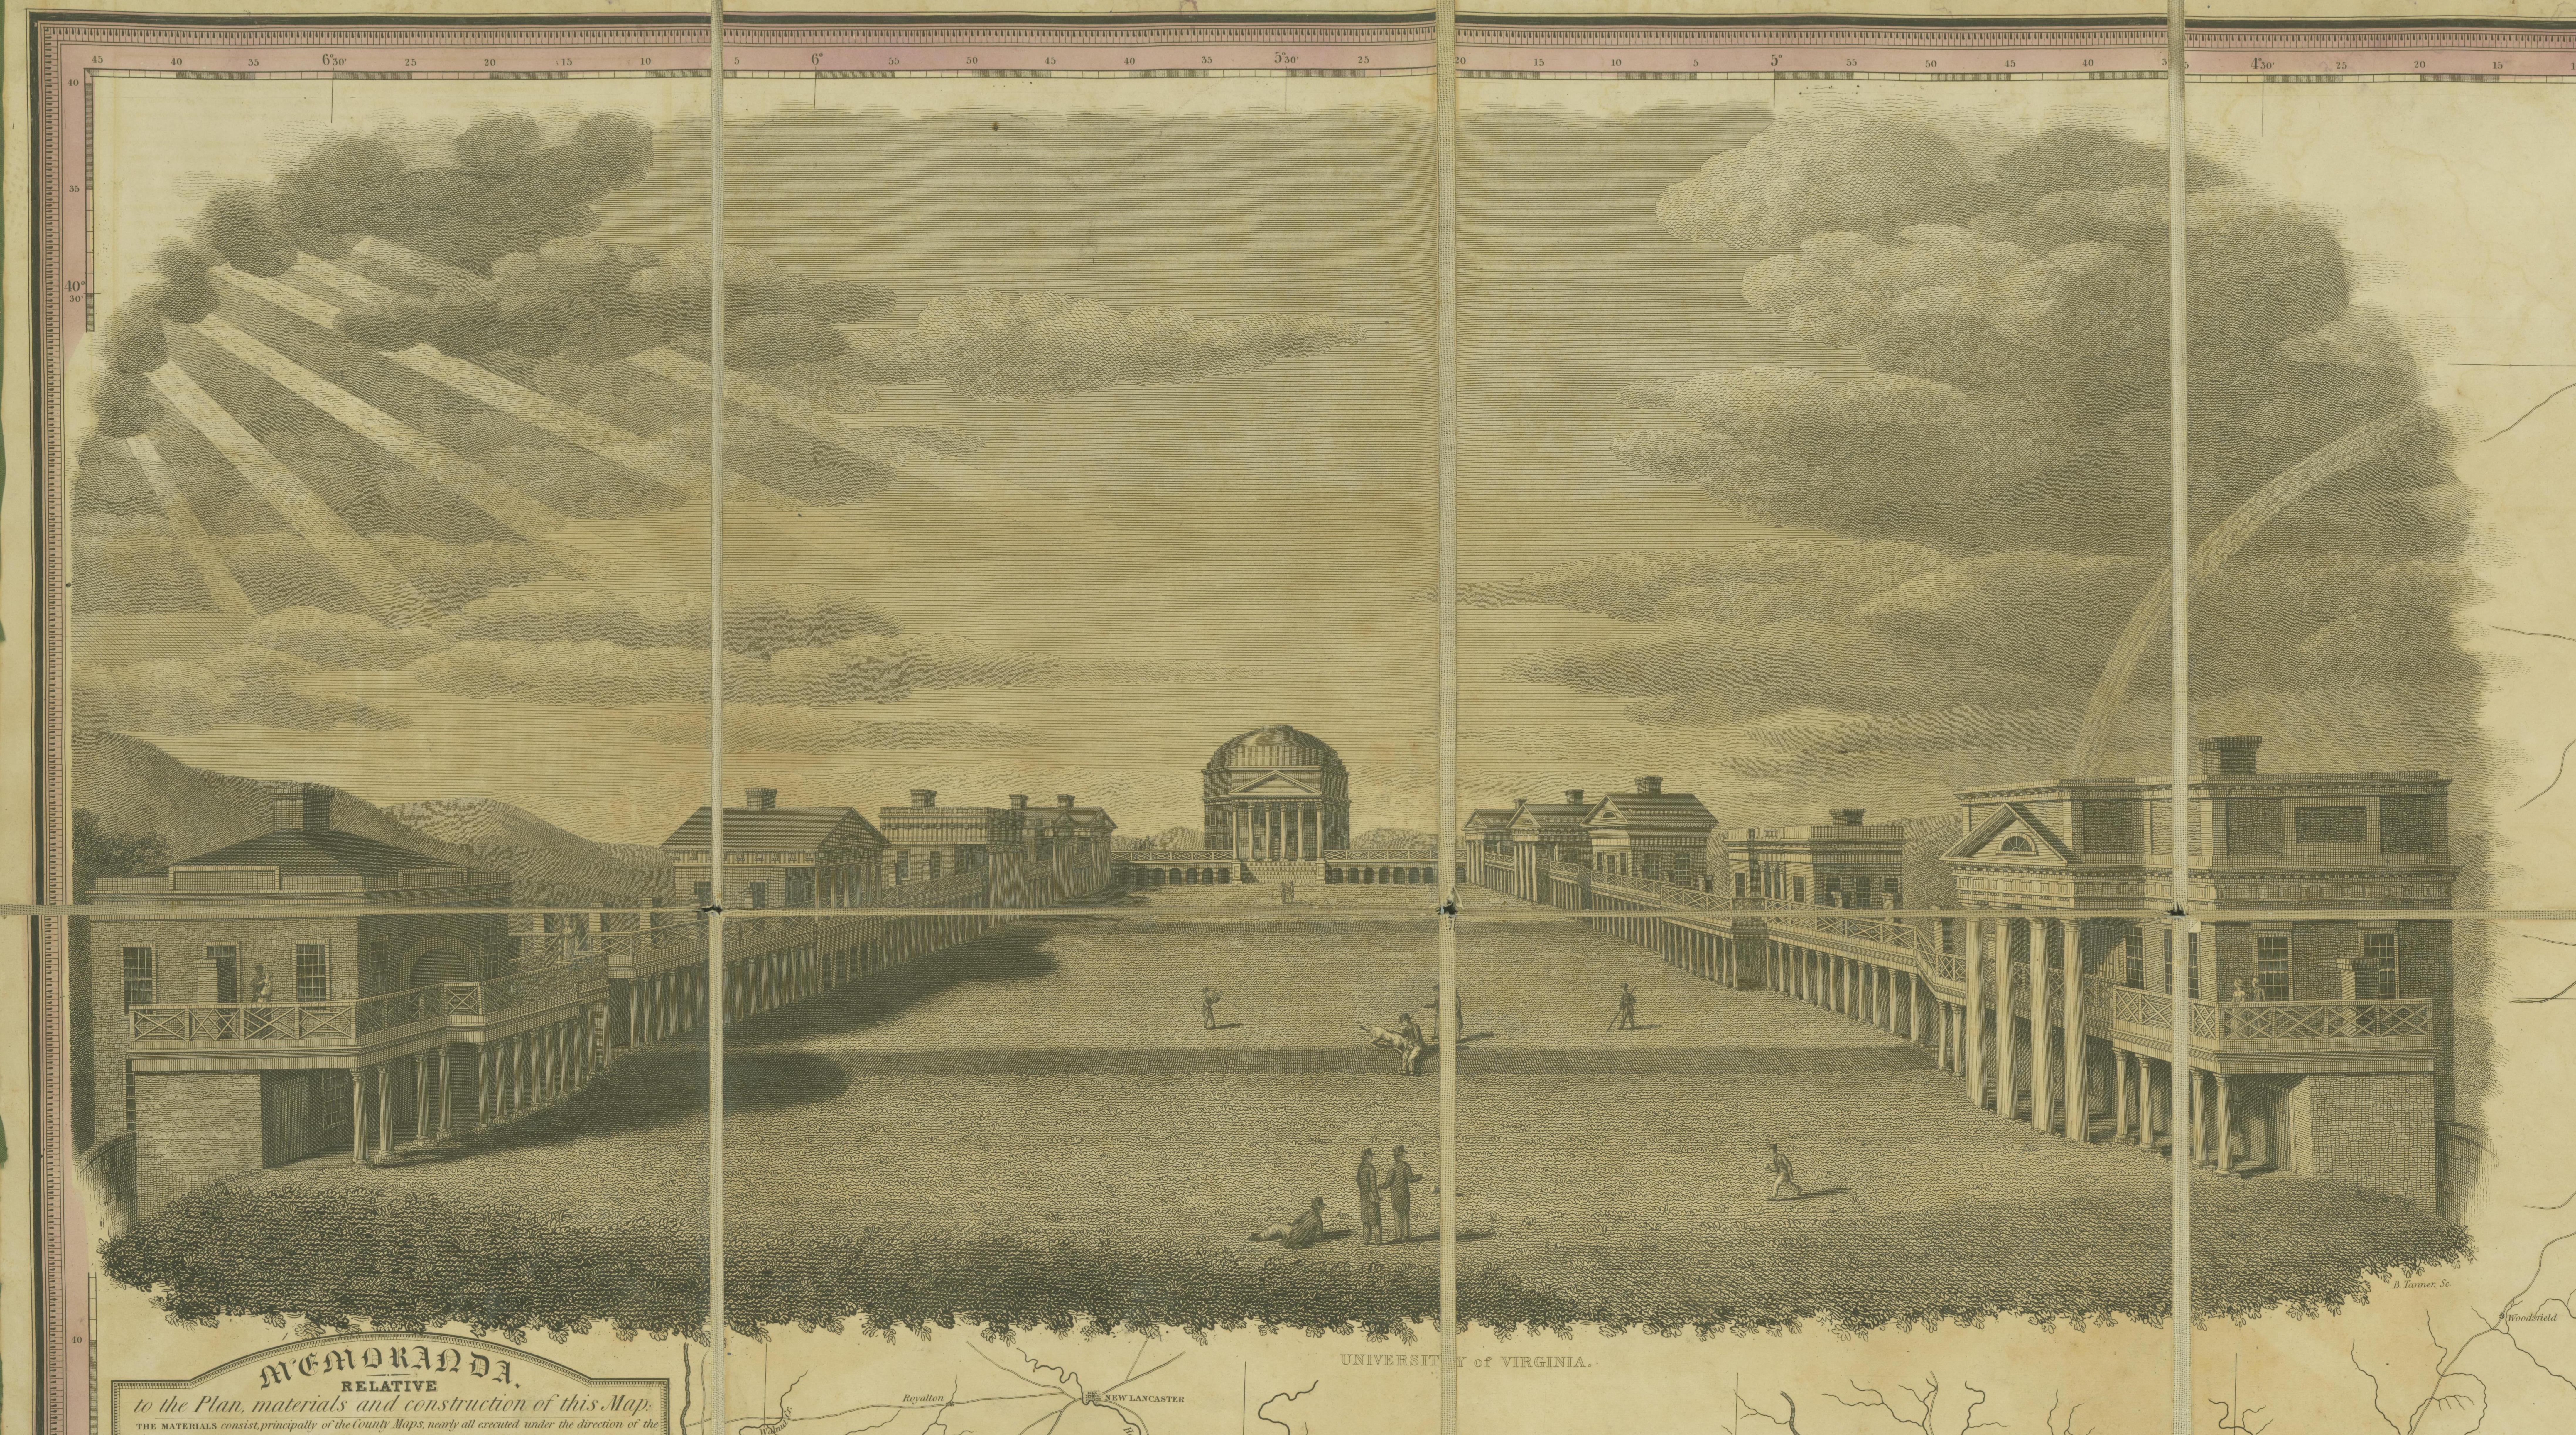 Benjamin Tanner's 1826 engraved view of the newly opened University of Virginia.